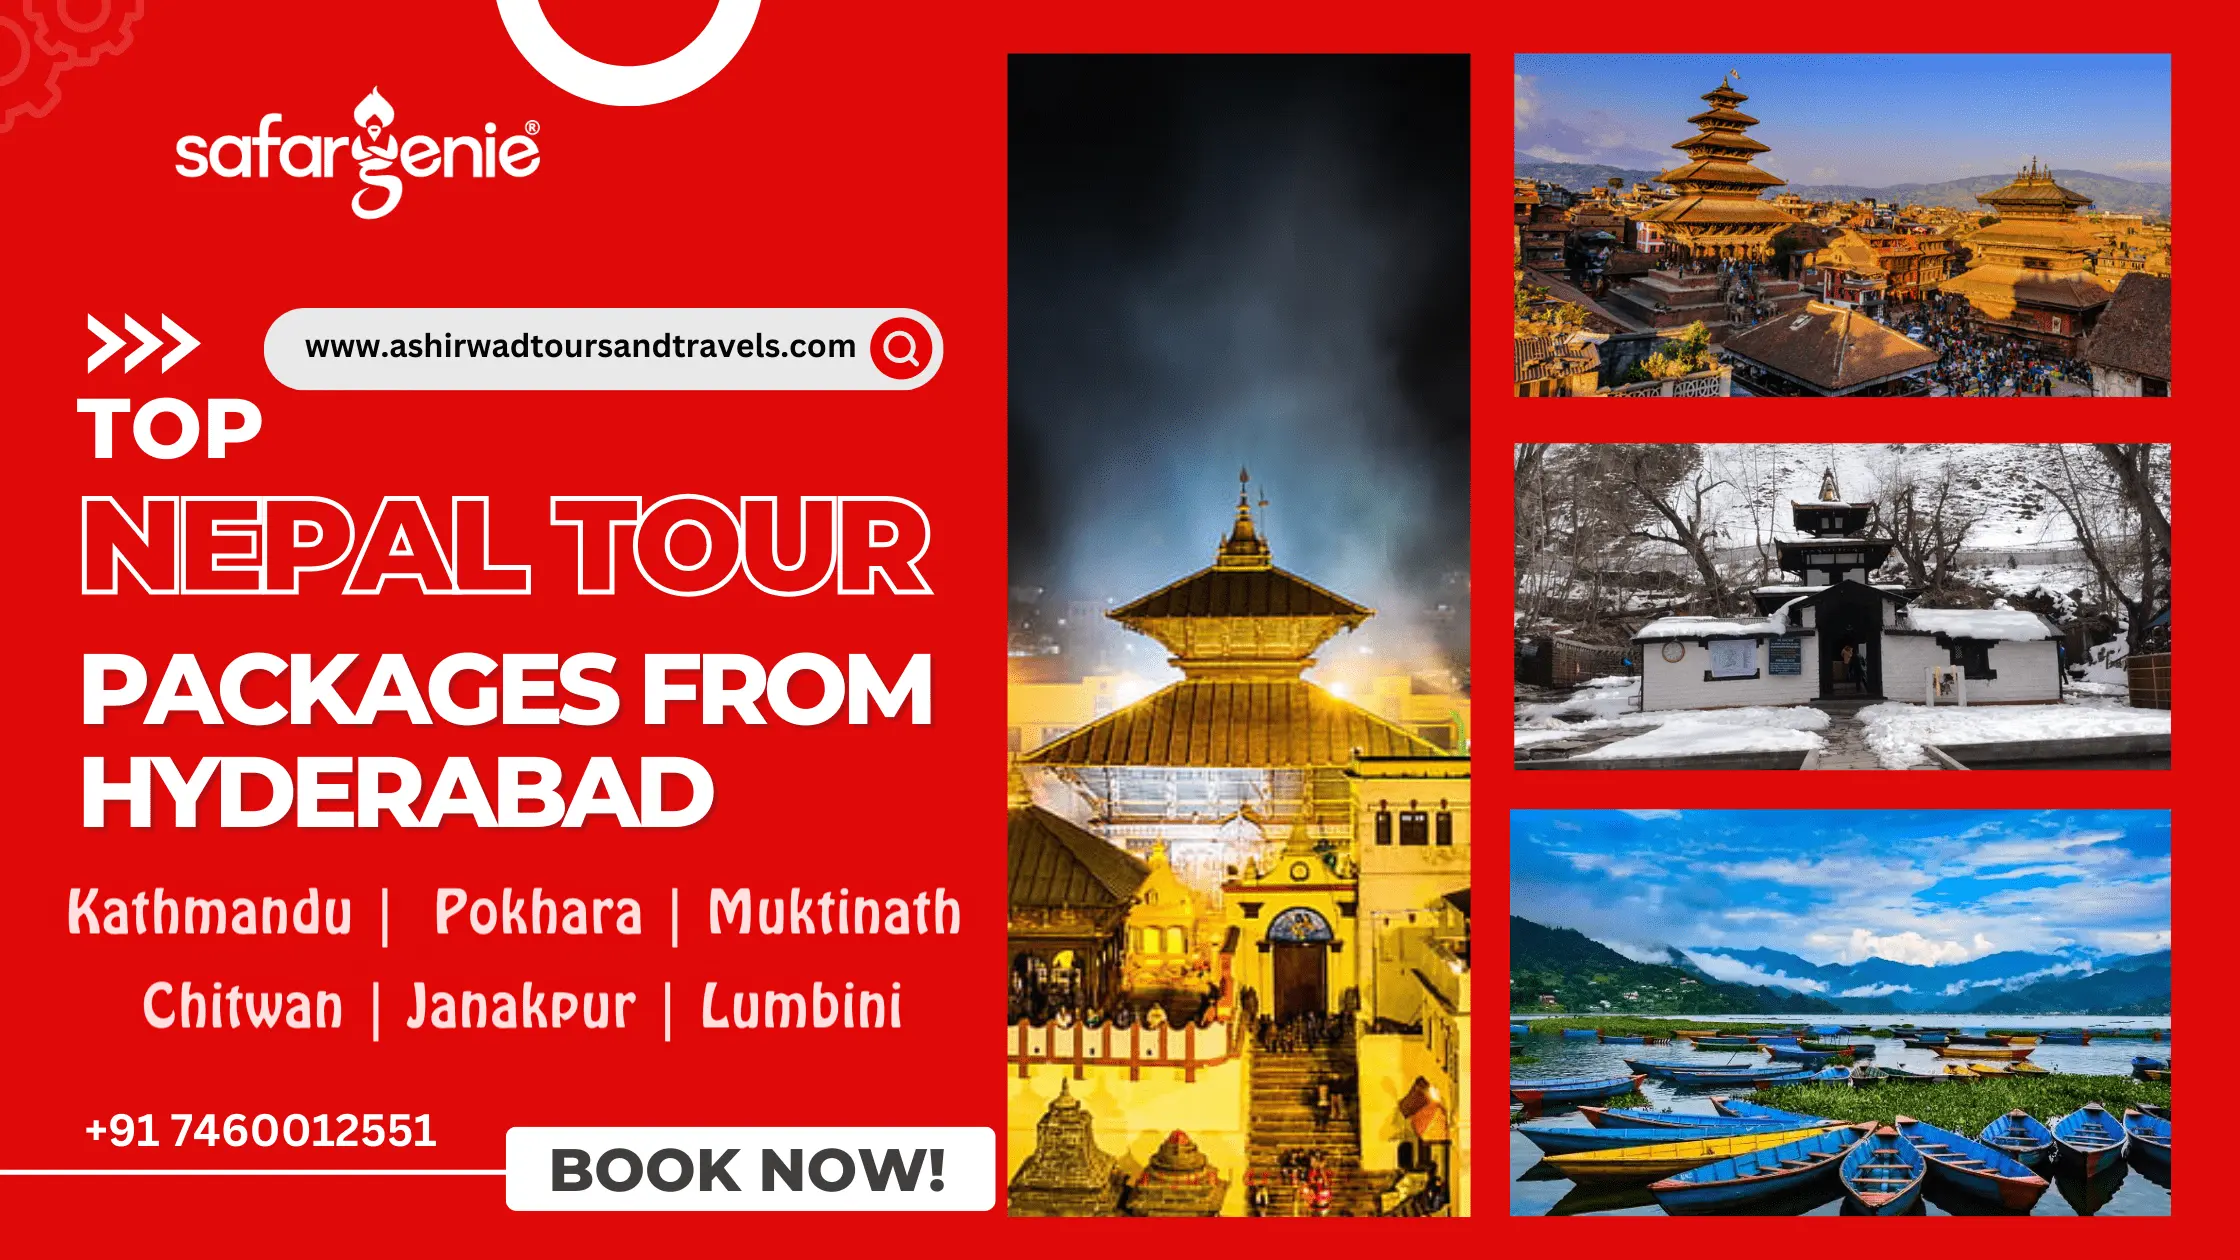 Embark On AHimalaya Odyssey With The Best Nepal Tour Package From Hyderabad 